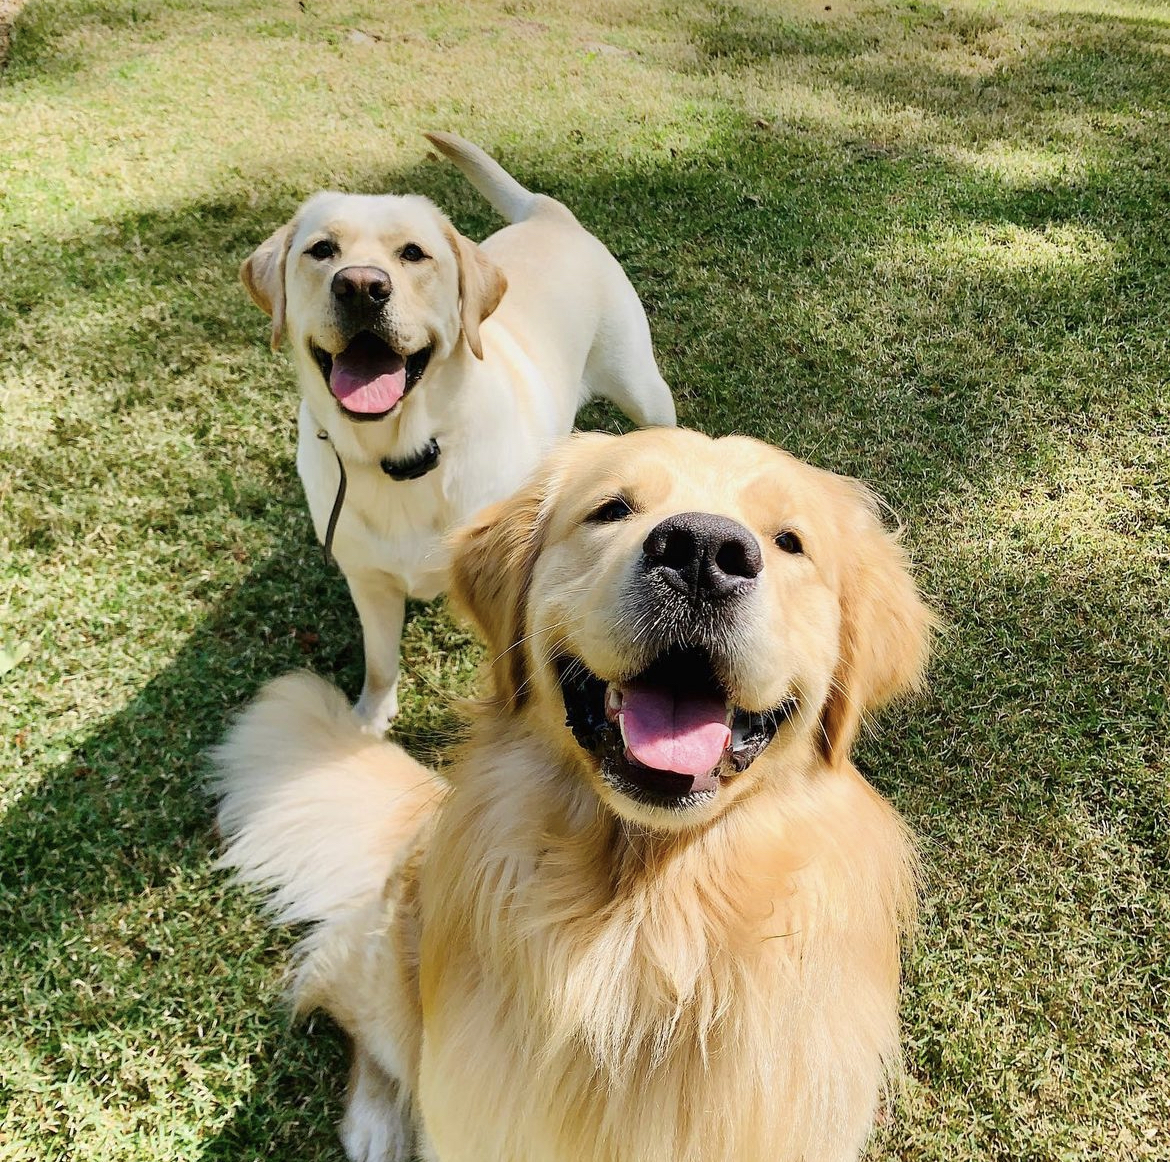 A Golden Retriever and a Labrador Retriever waiting for a pet sitter to throw a ball during playtime. This is the level of service offered with Just a Walk in the Park.